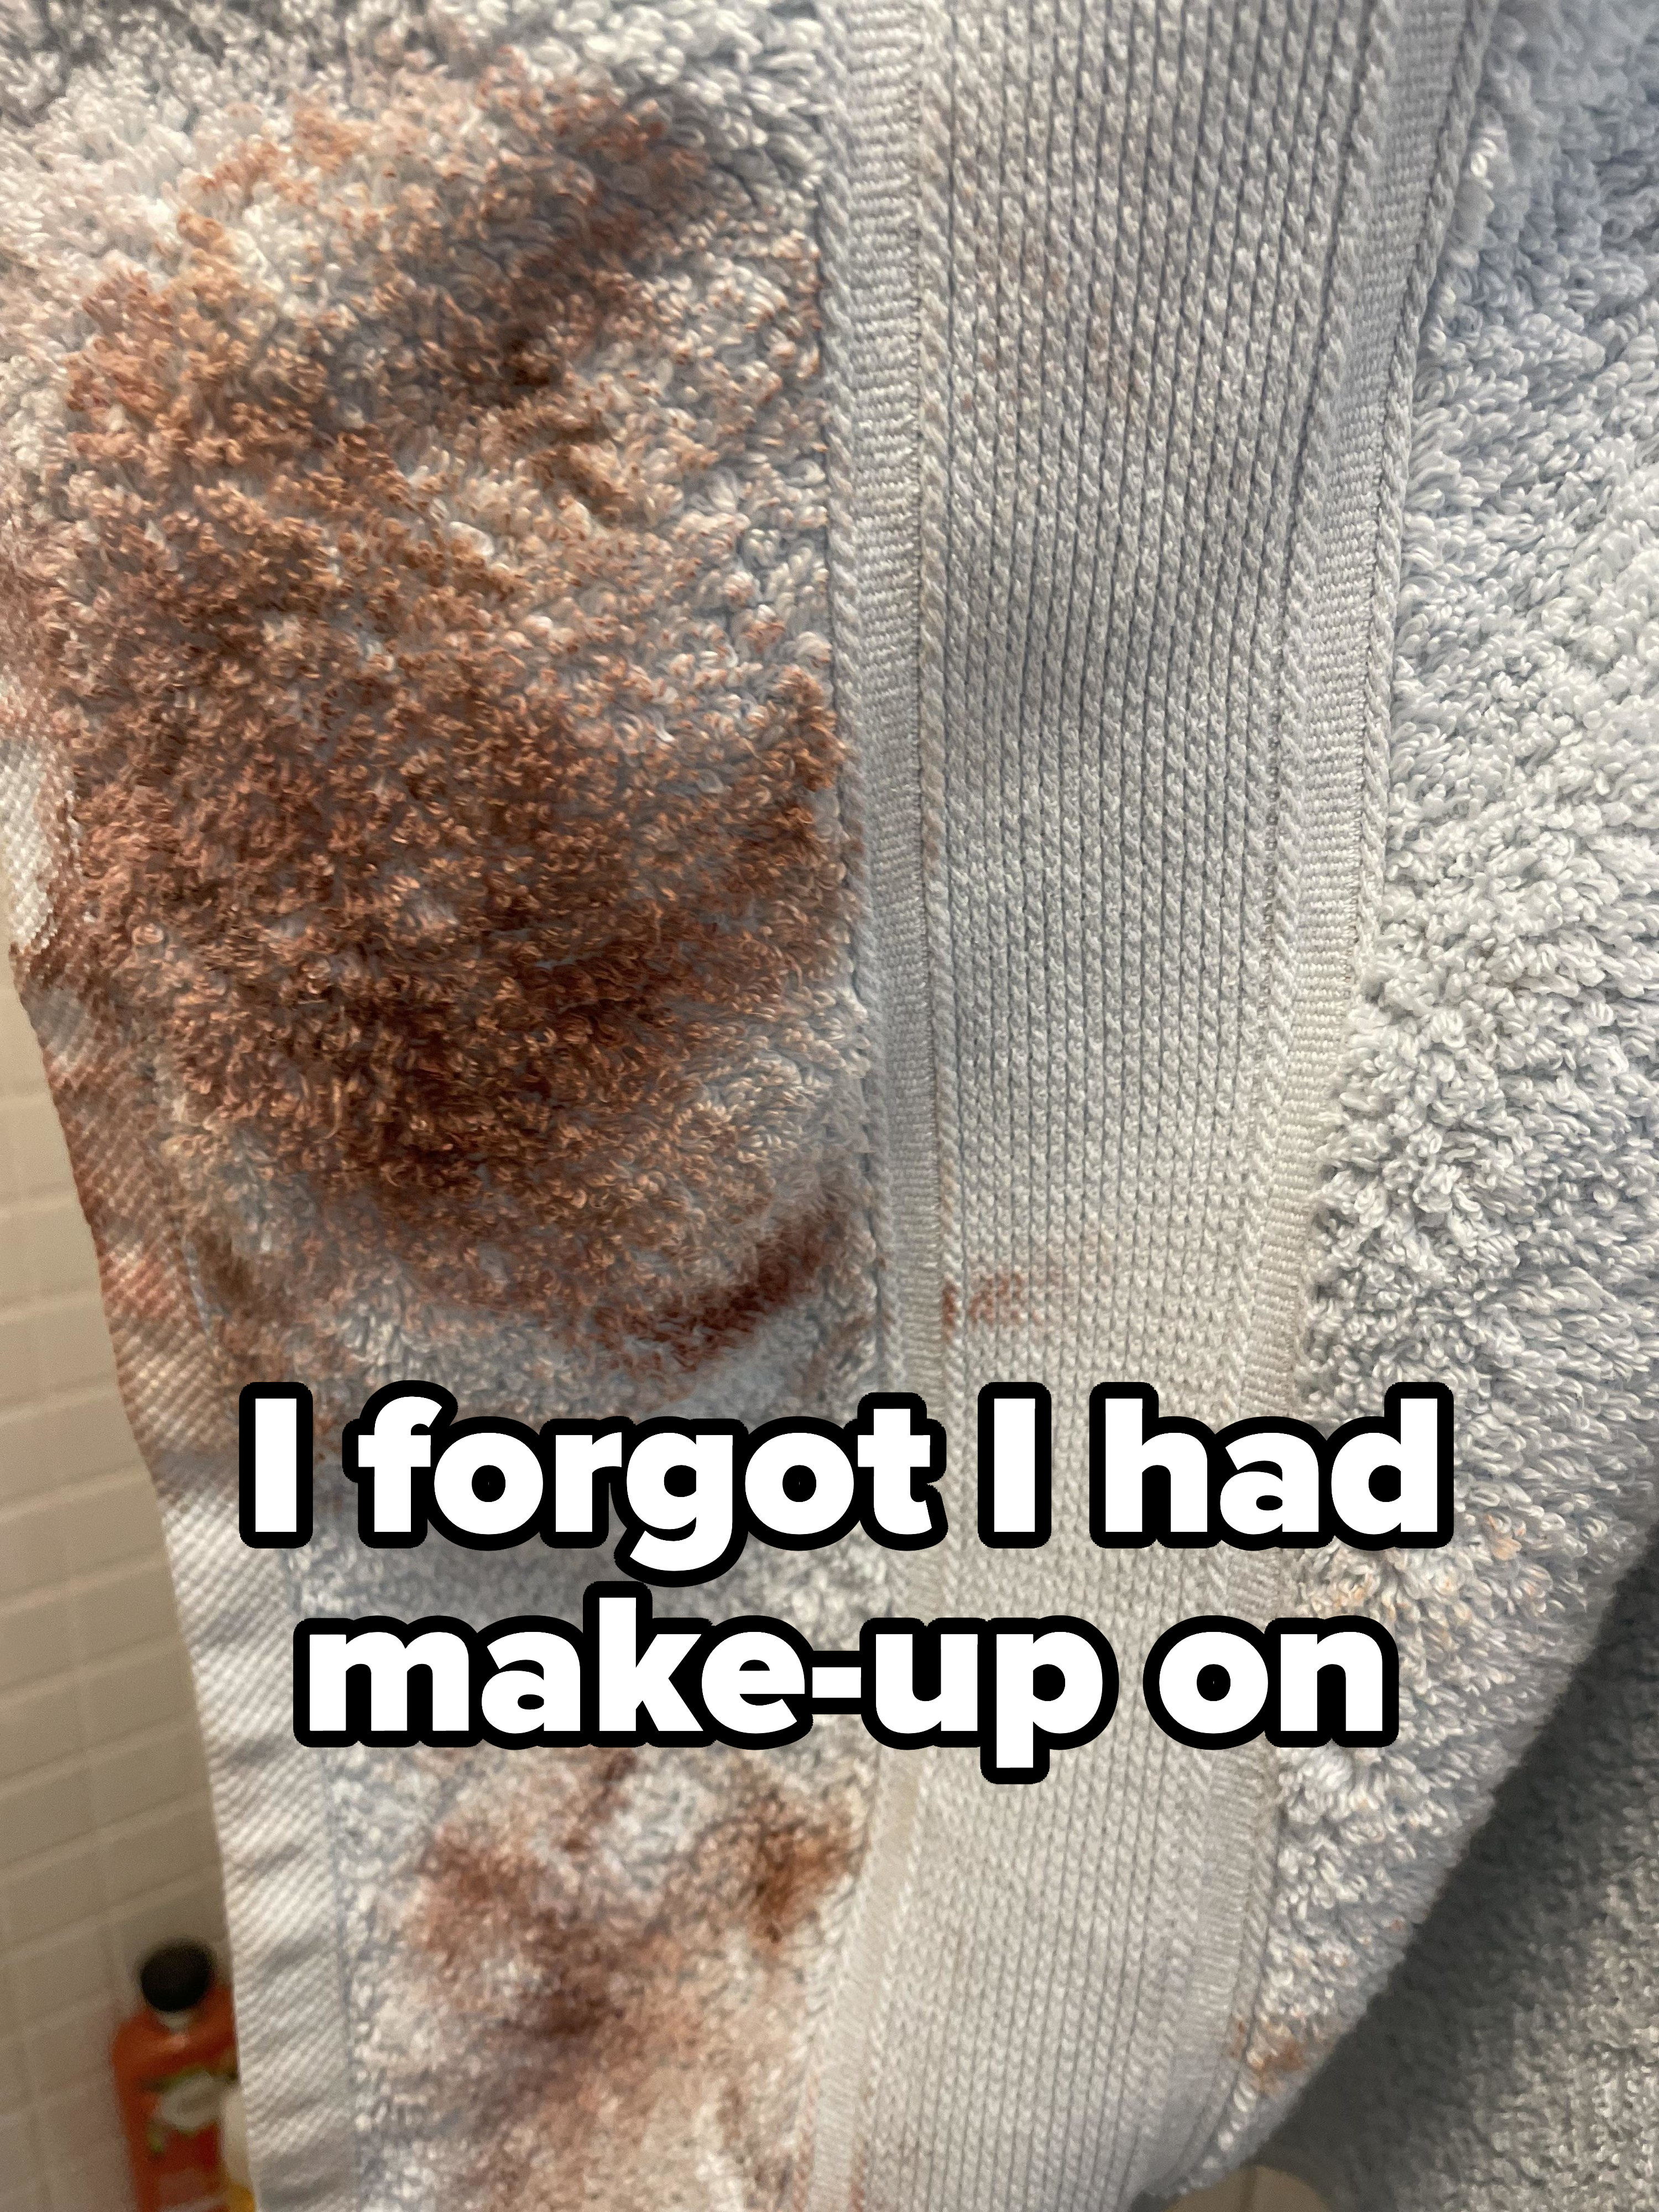 Makeup stains on a towel